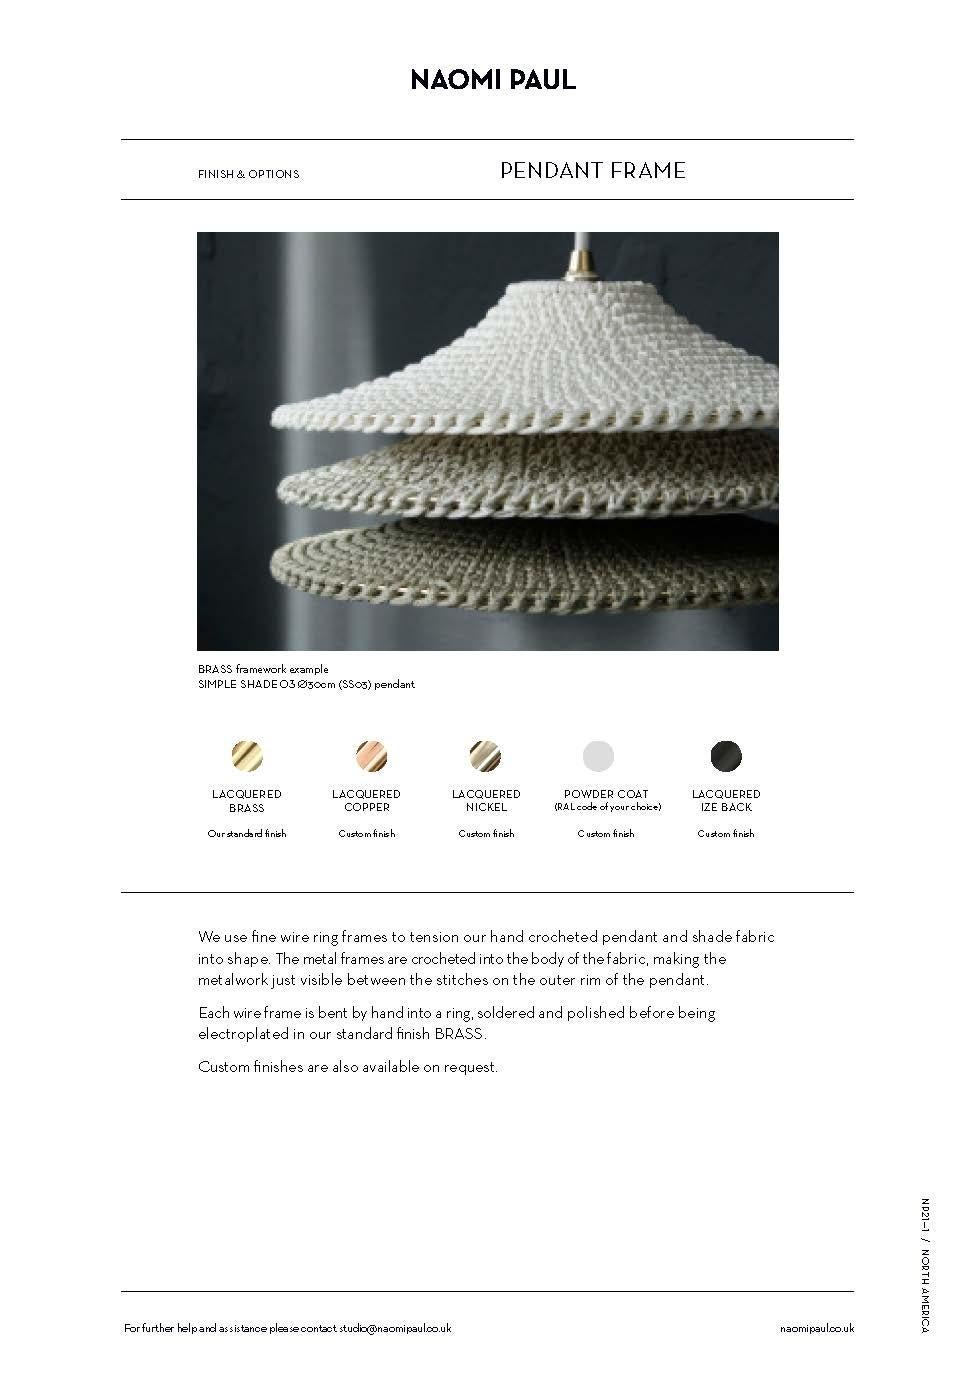 Metalwork SOLITAIRE 01 50/50 Pendant Light Ø80cm/31.5in, Hand Crocheted in Egyptian Cotton